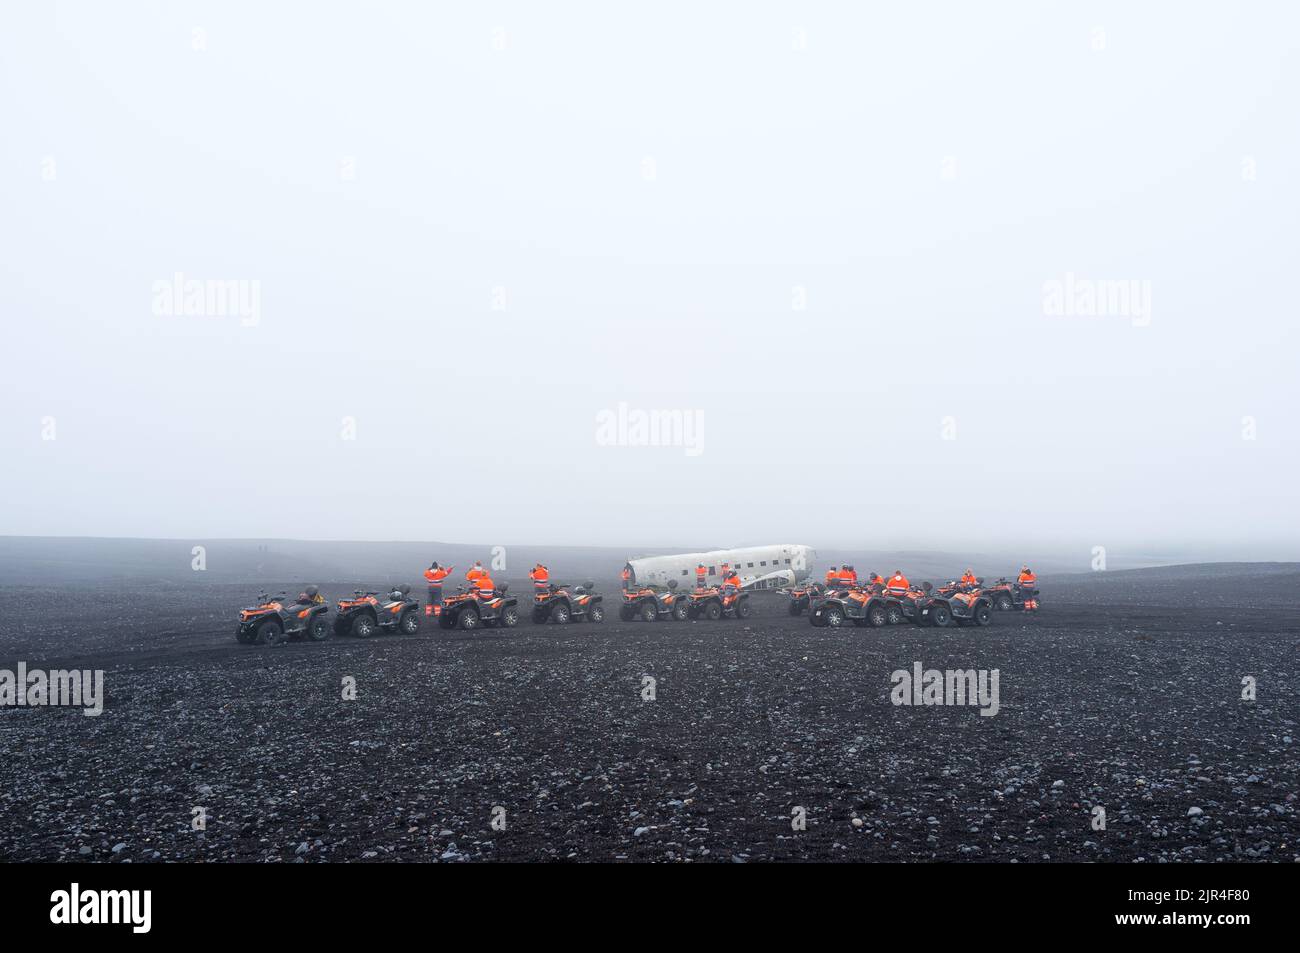 Tourists in orange overalls on quad bikes near the Abandoned wreck of a DC Plane on Solheimasandur in Iceland on a misty day Stock Photo